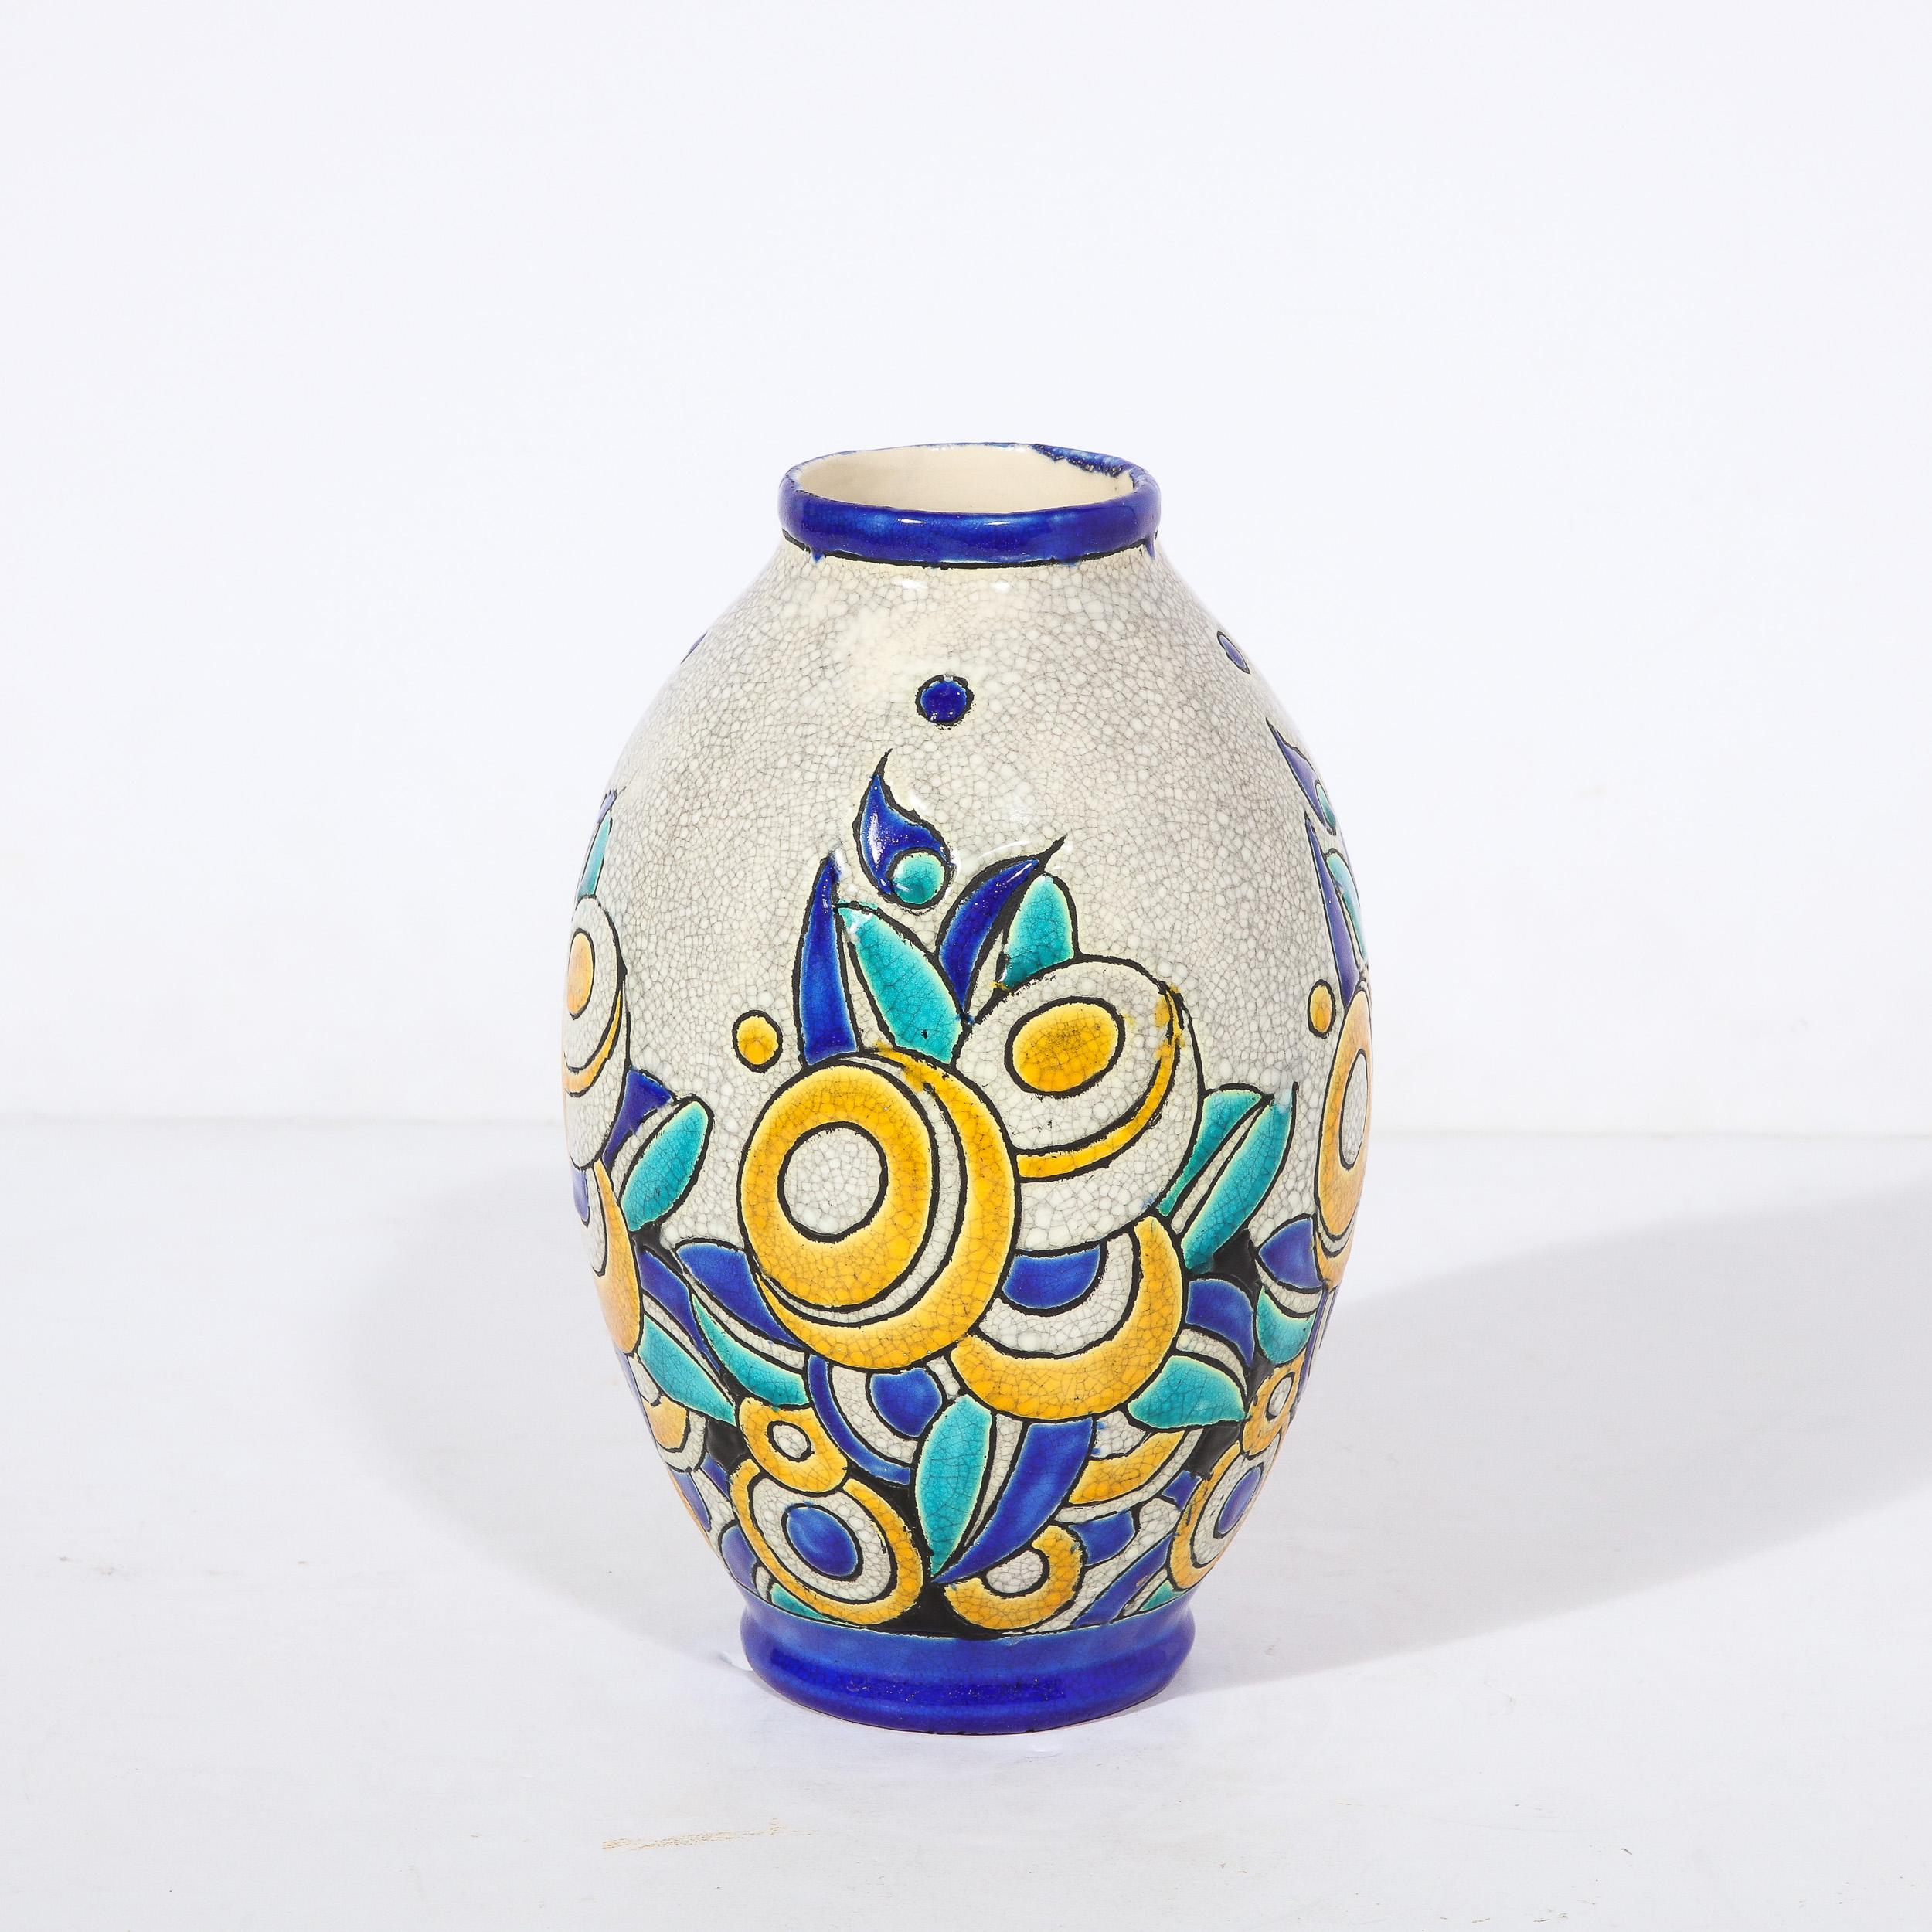 This stunningly colored Art Deco Ceramic Vase with Cubic Flowers in Craquelure & Multicolor Glazed Detailing is designed by Charles Catteau for Boch Freres Keramis, originating from Belgium, Circa 1930. Boch Frères Keramis was founded in 1841 by